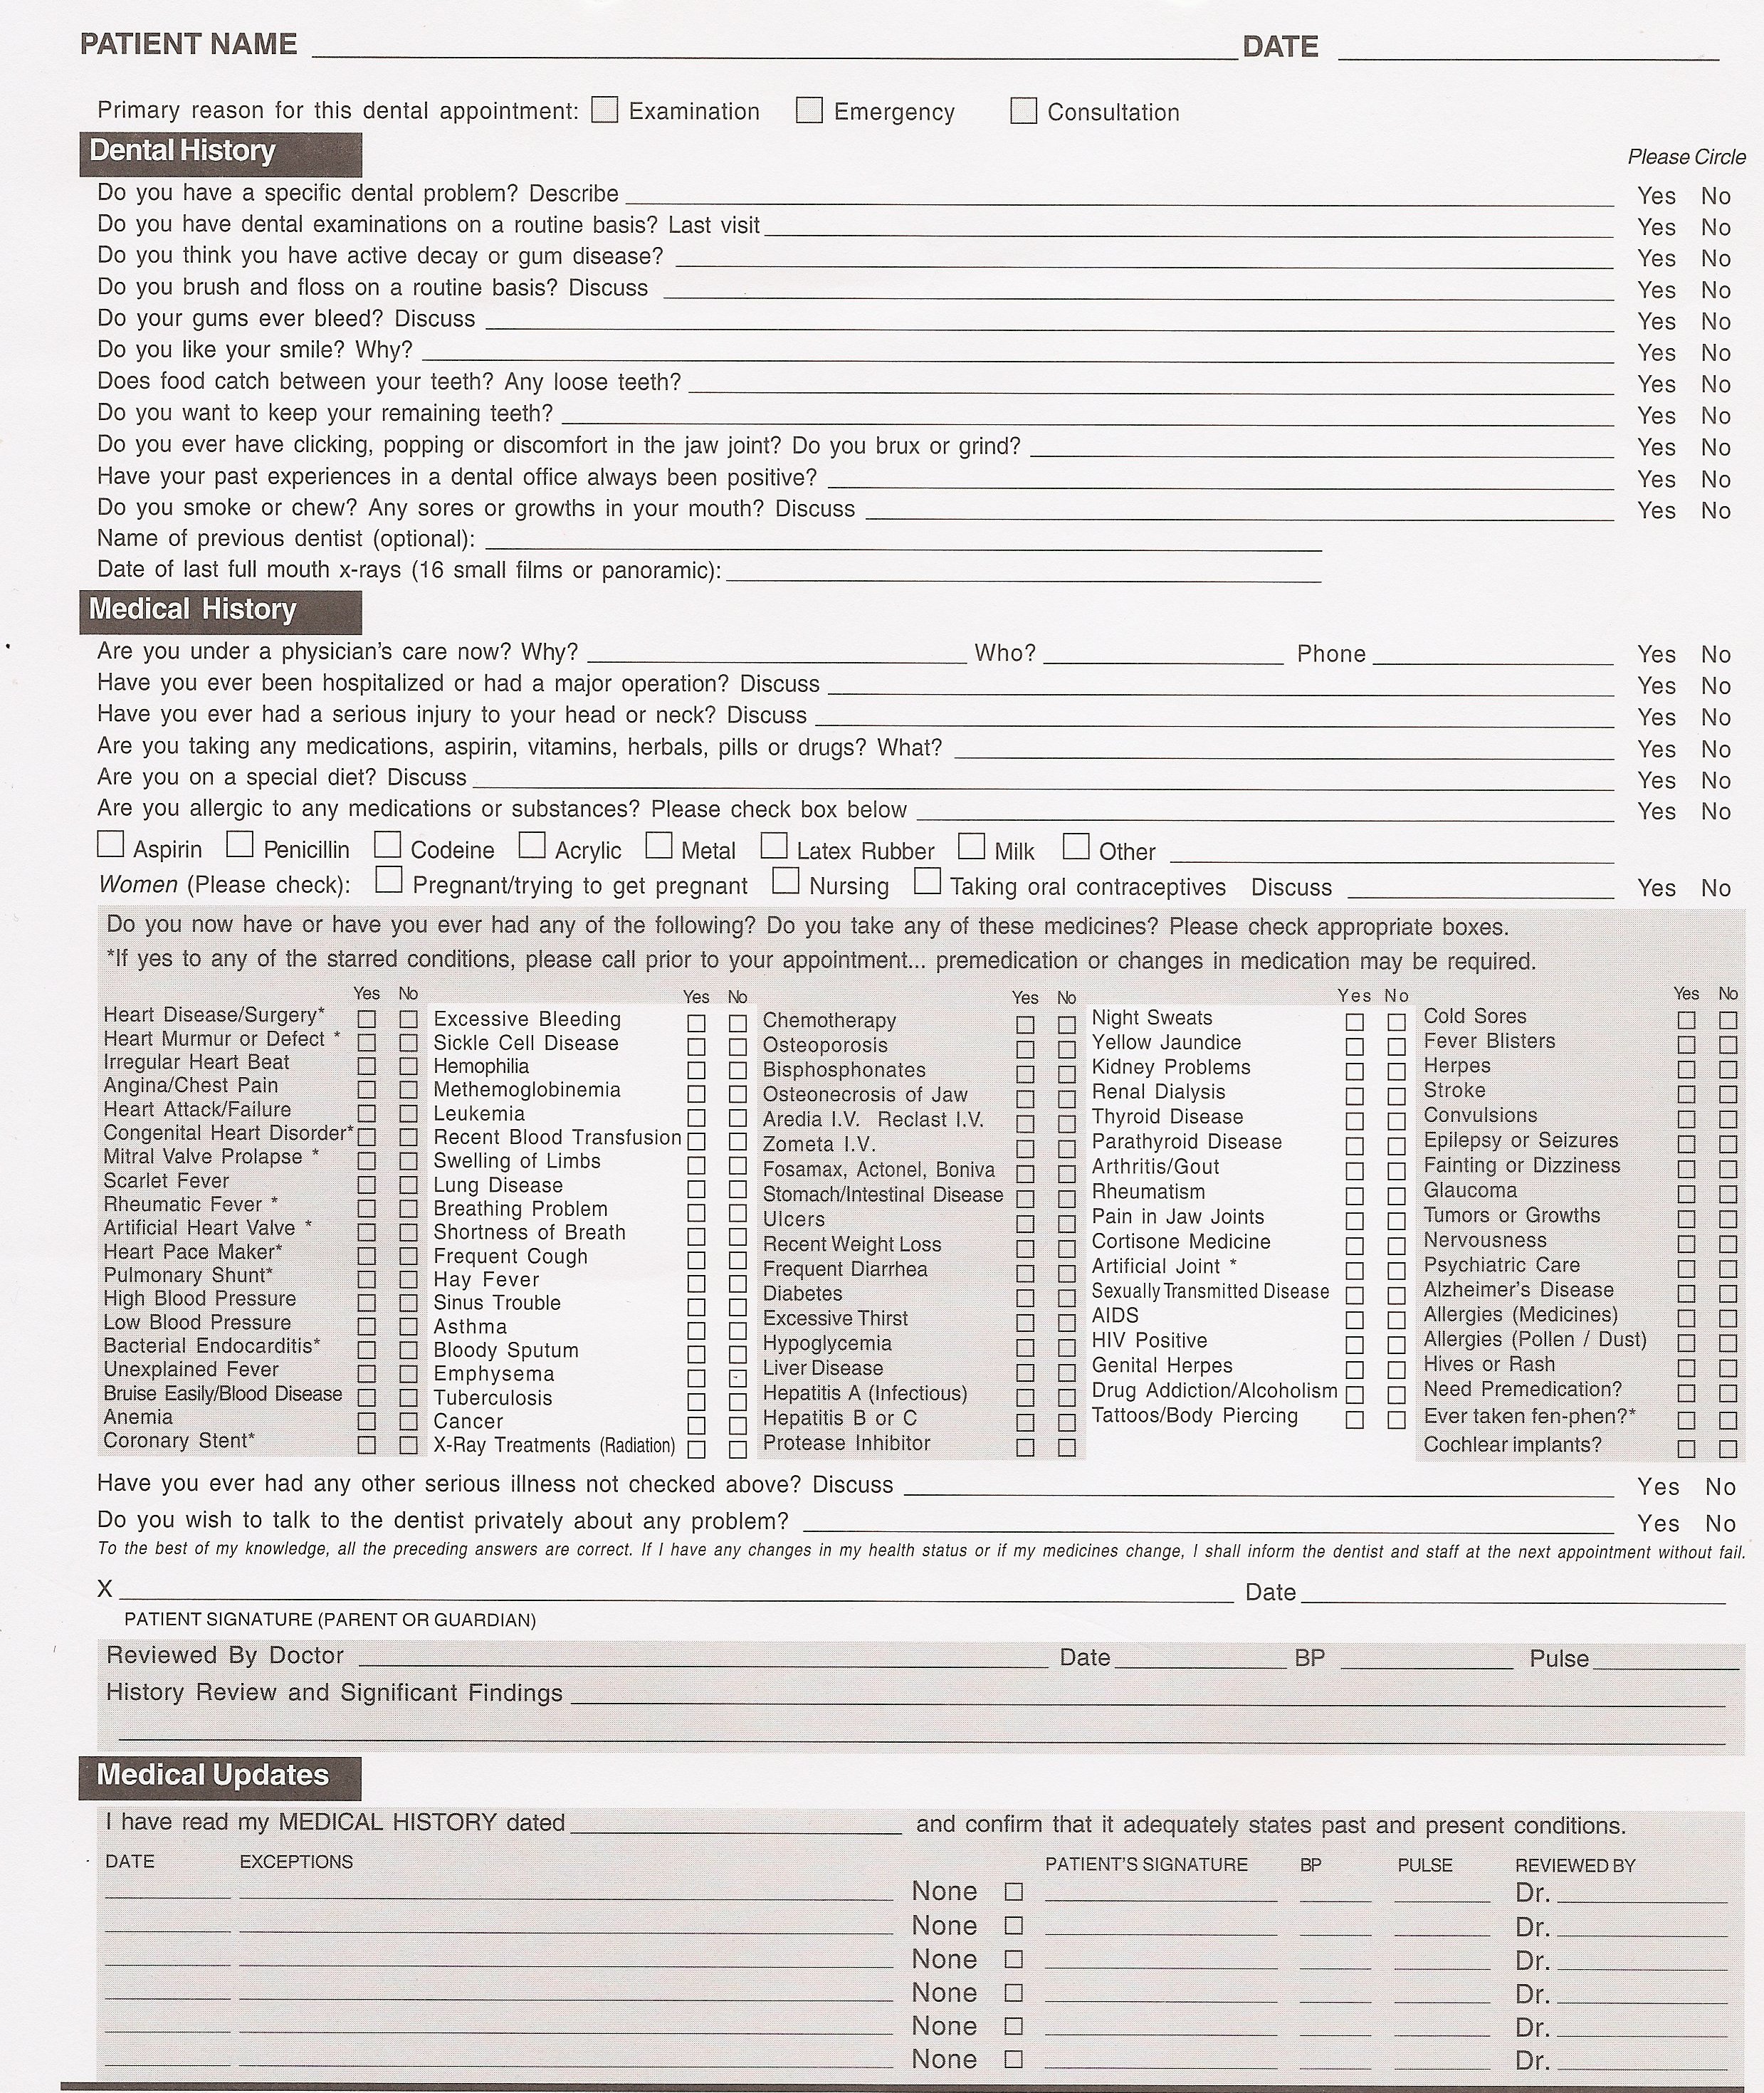 Giangrasso Dental Associates | Medical History Form for New Patients